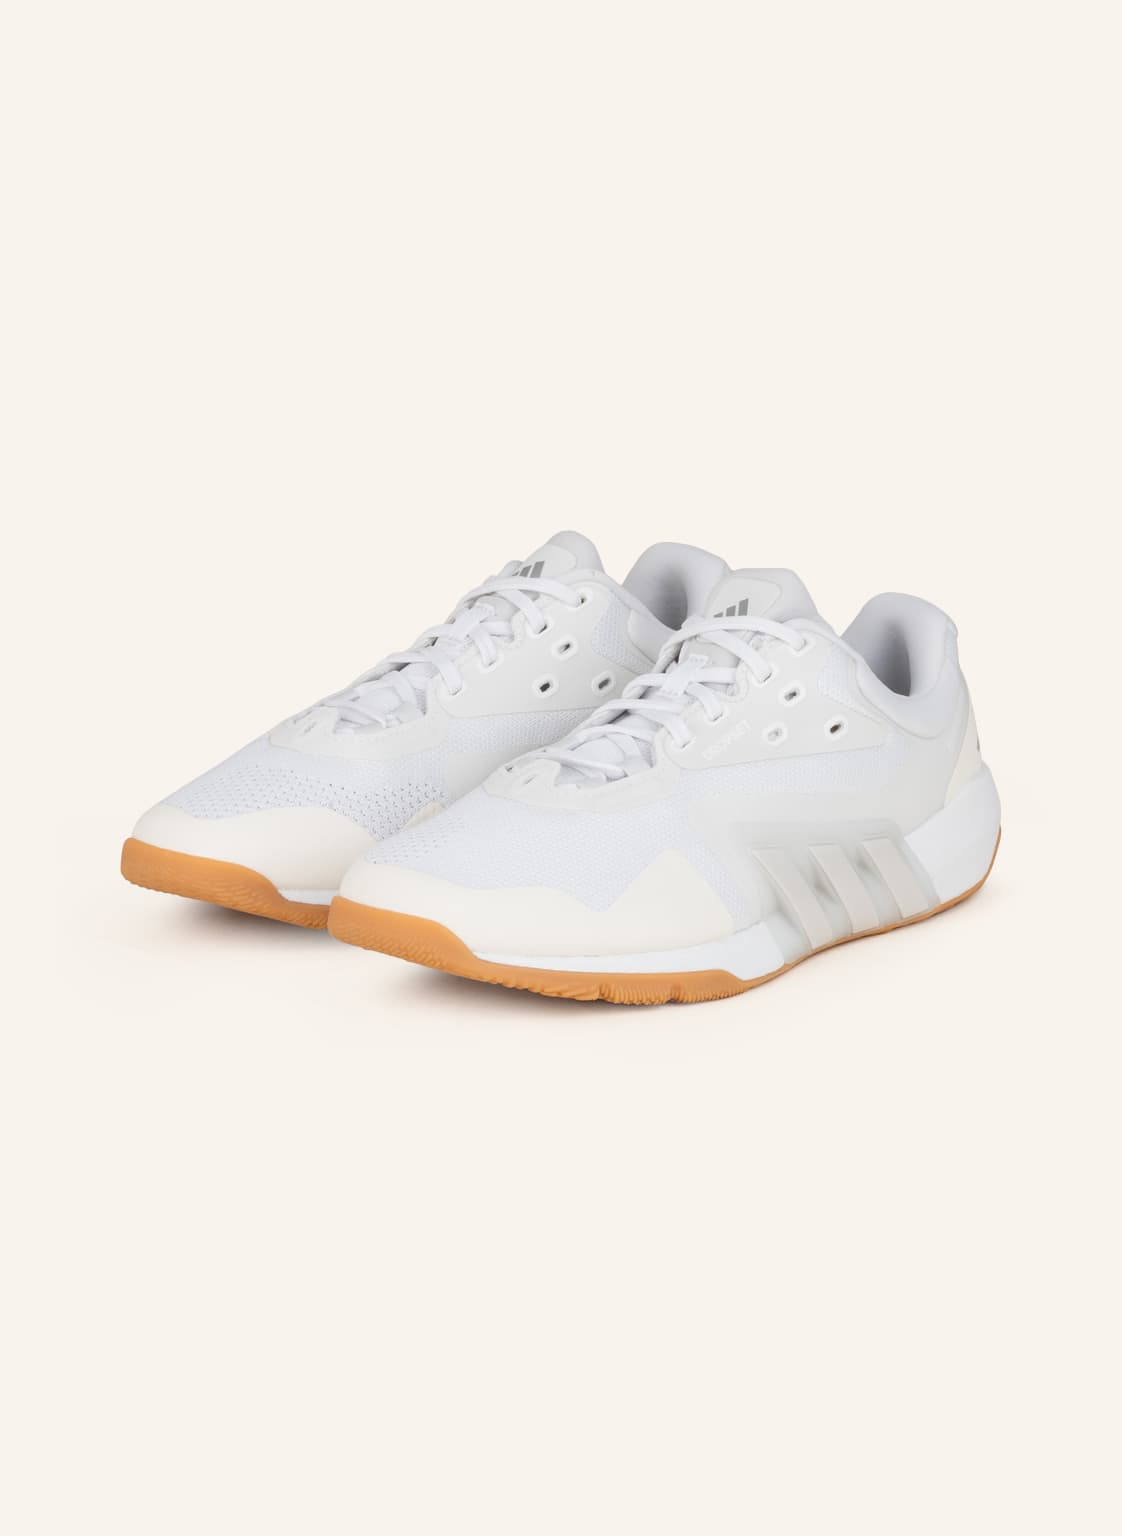 Image of Adidas Fitnessschuhe Dropset Trainer weiss